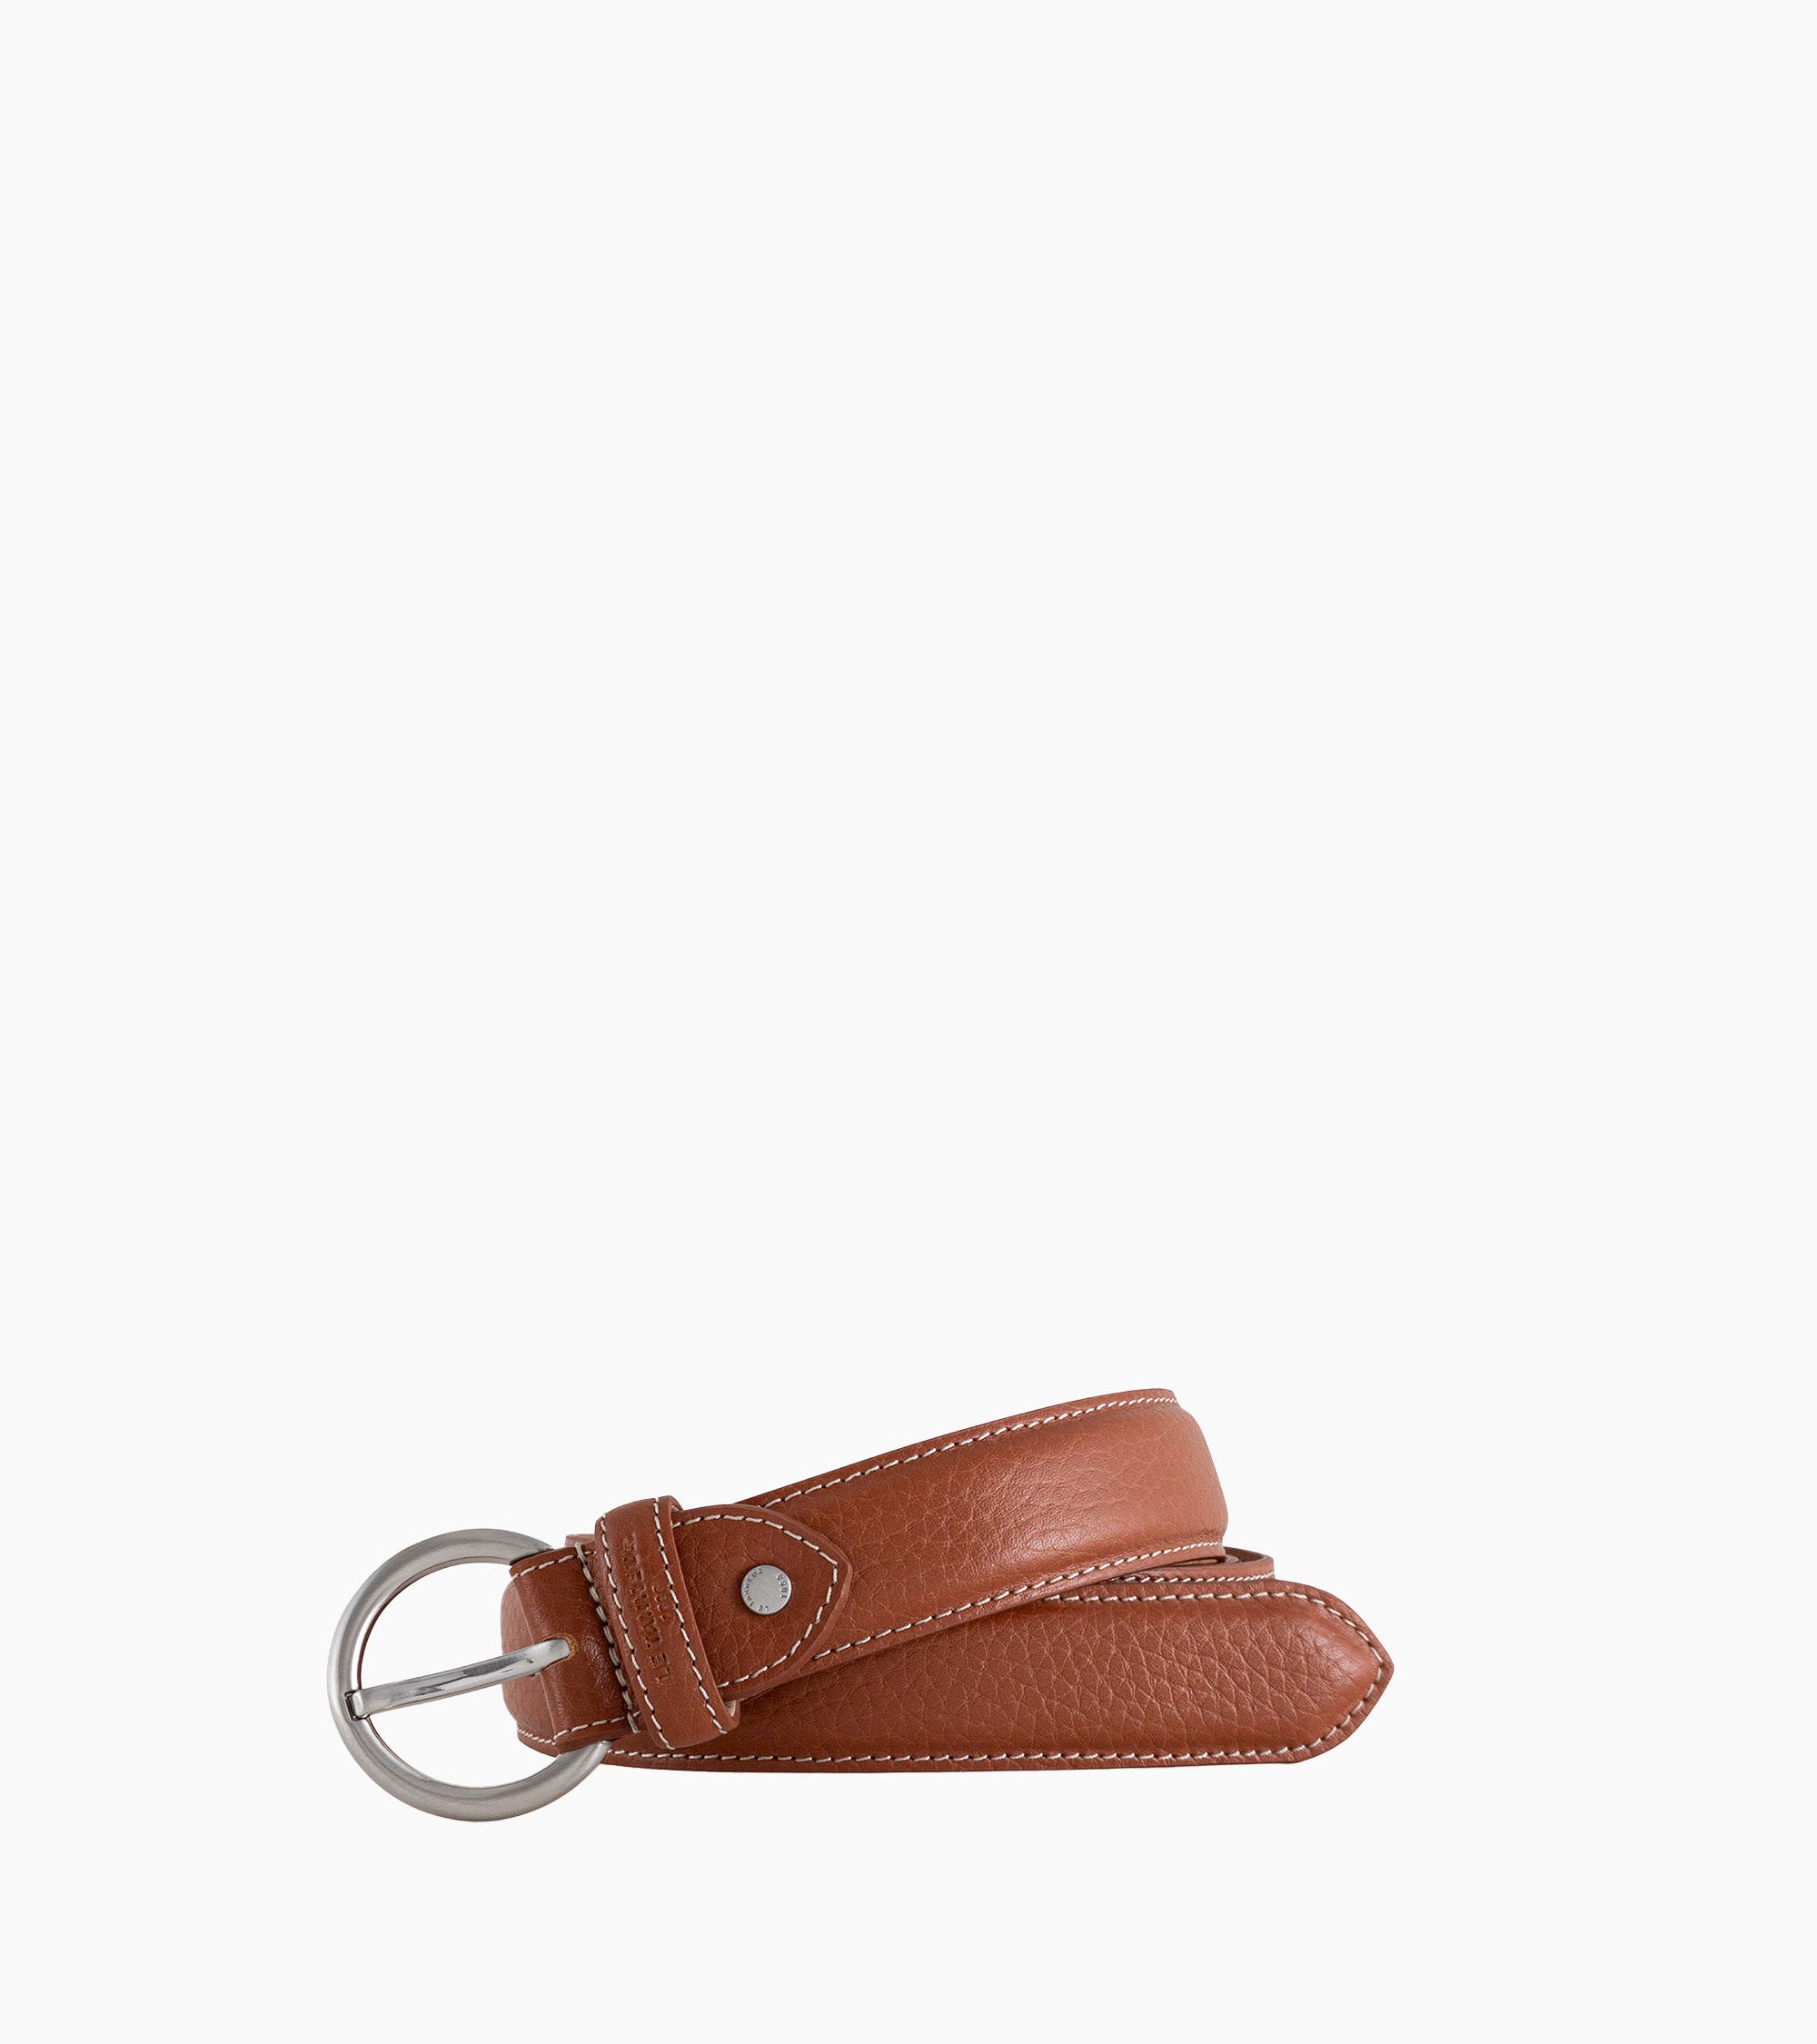 Vegetable tanned leather women's belt with round buckle